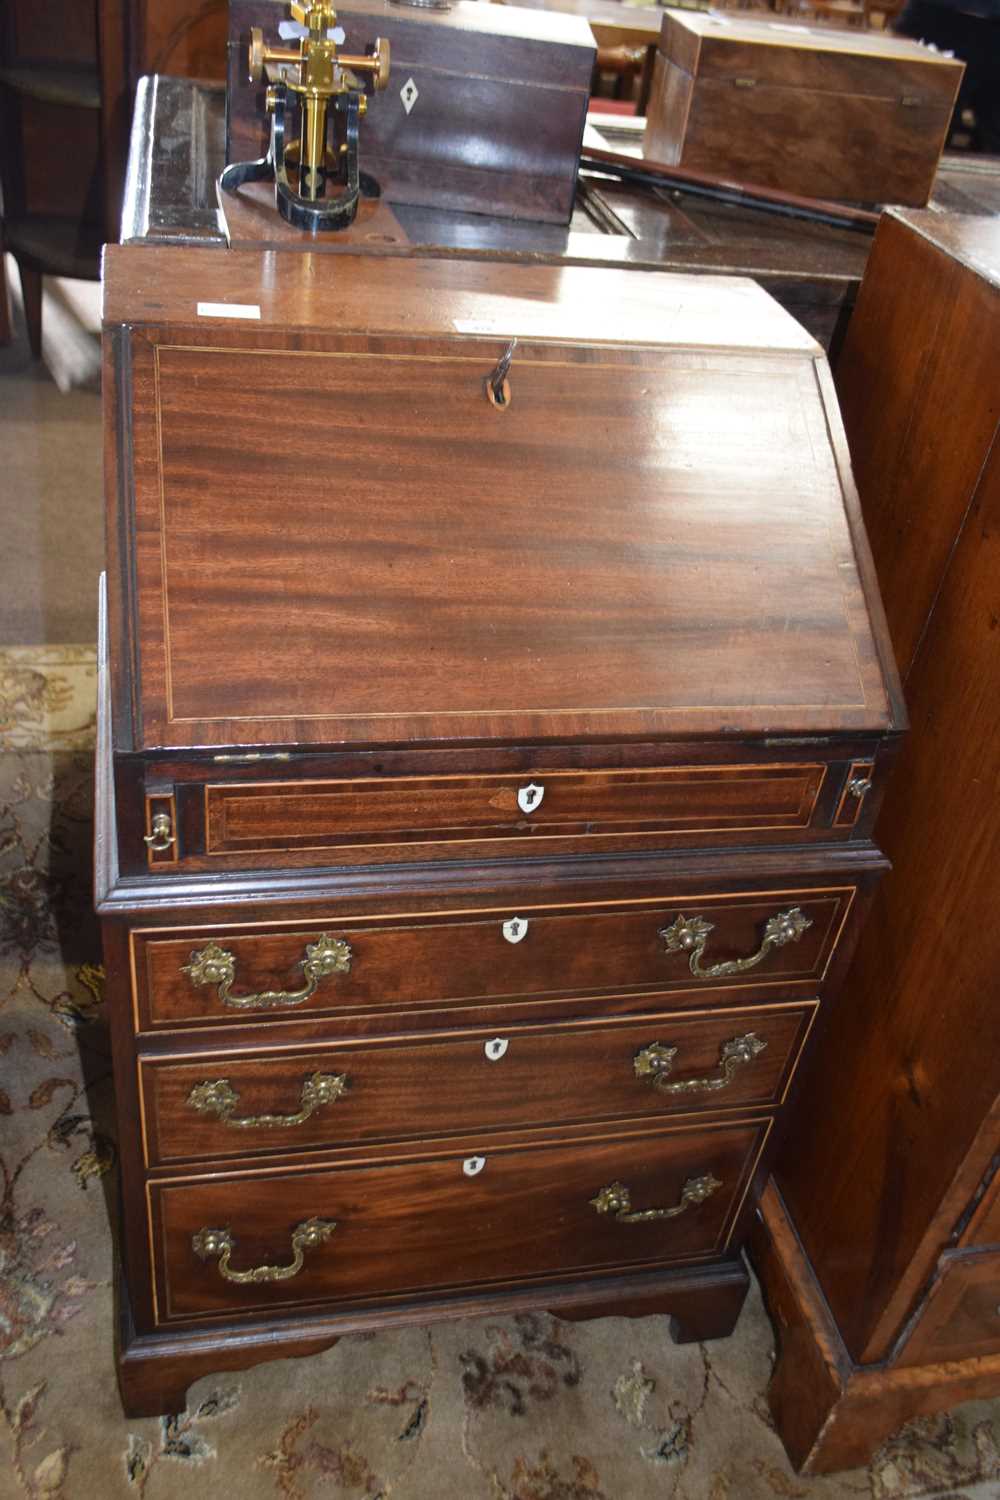 Small Georgian style mahogany bureau of narrow form with full front opening to an interior with